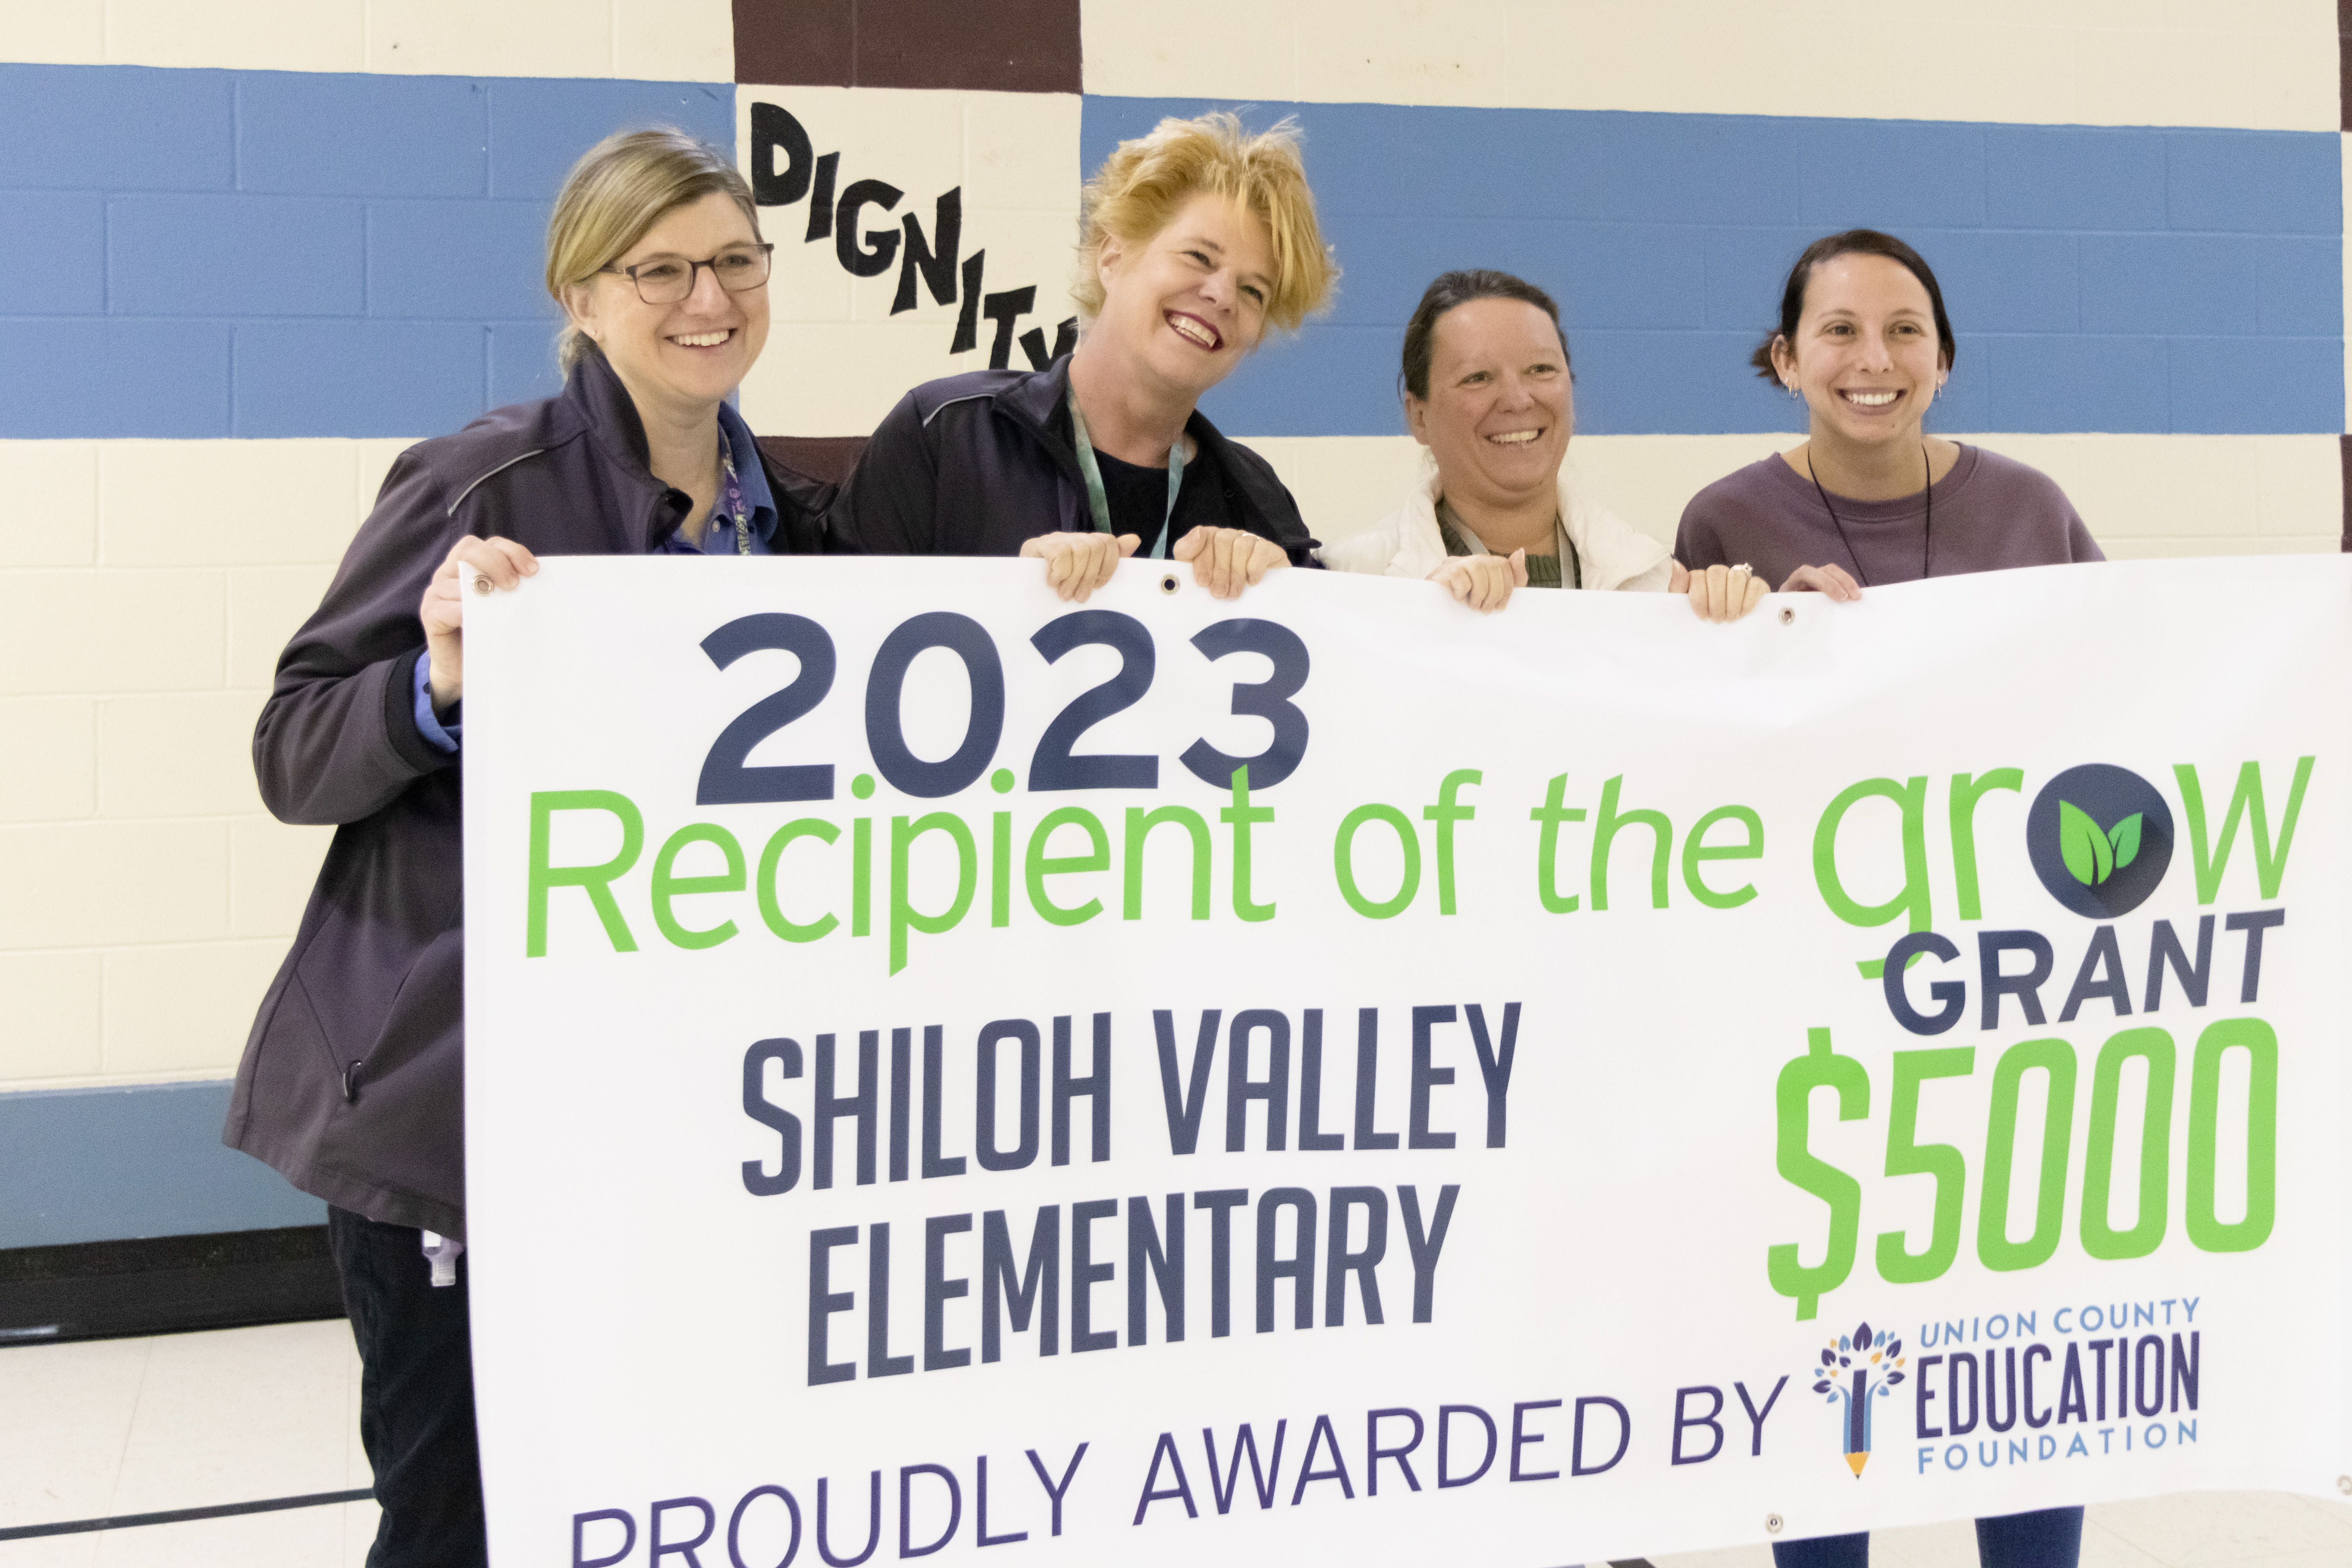 GROW Grant awarded to Shiloh Valley Elementary